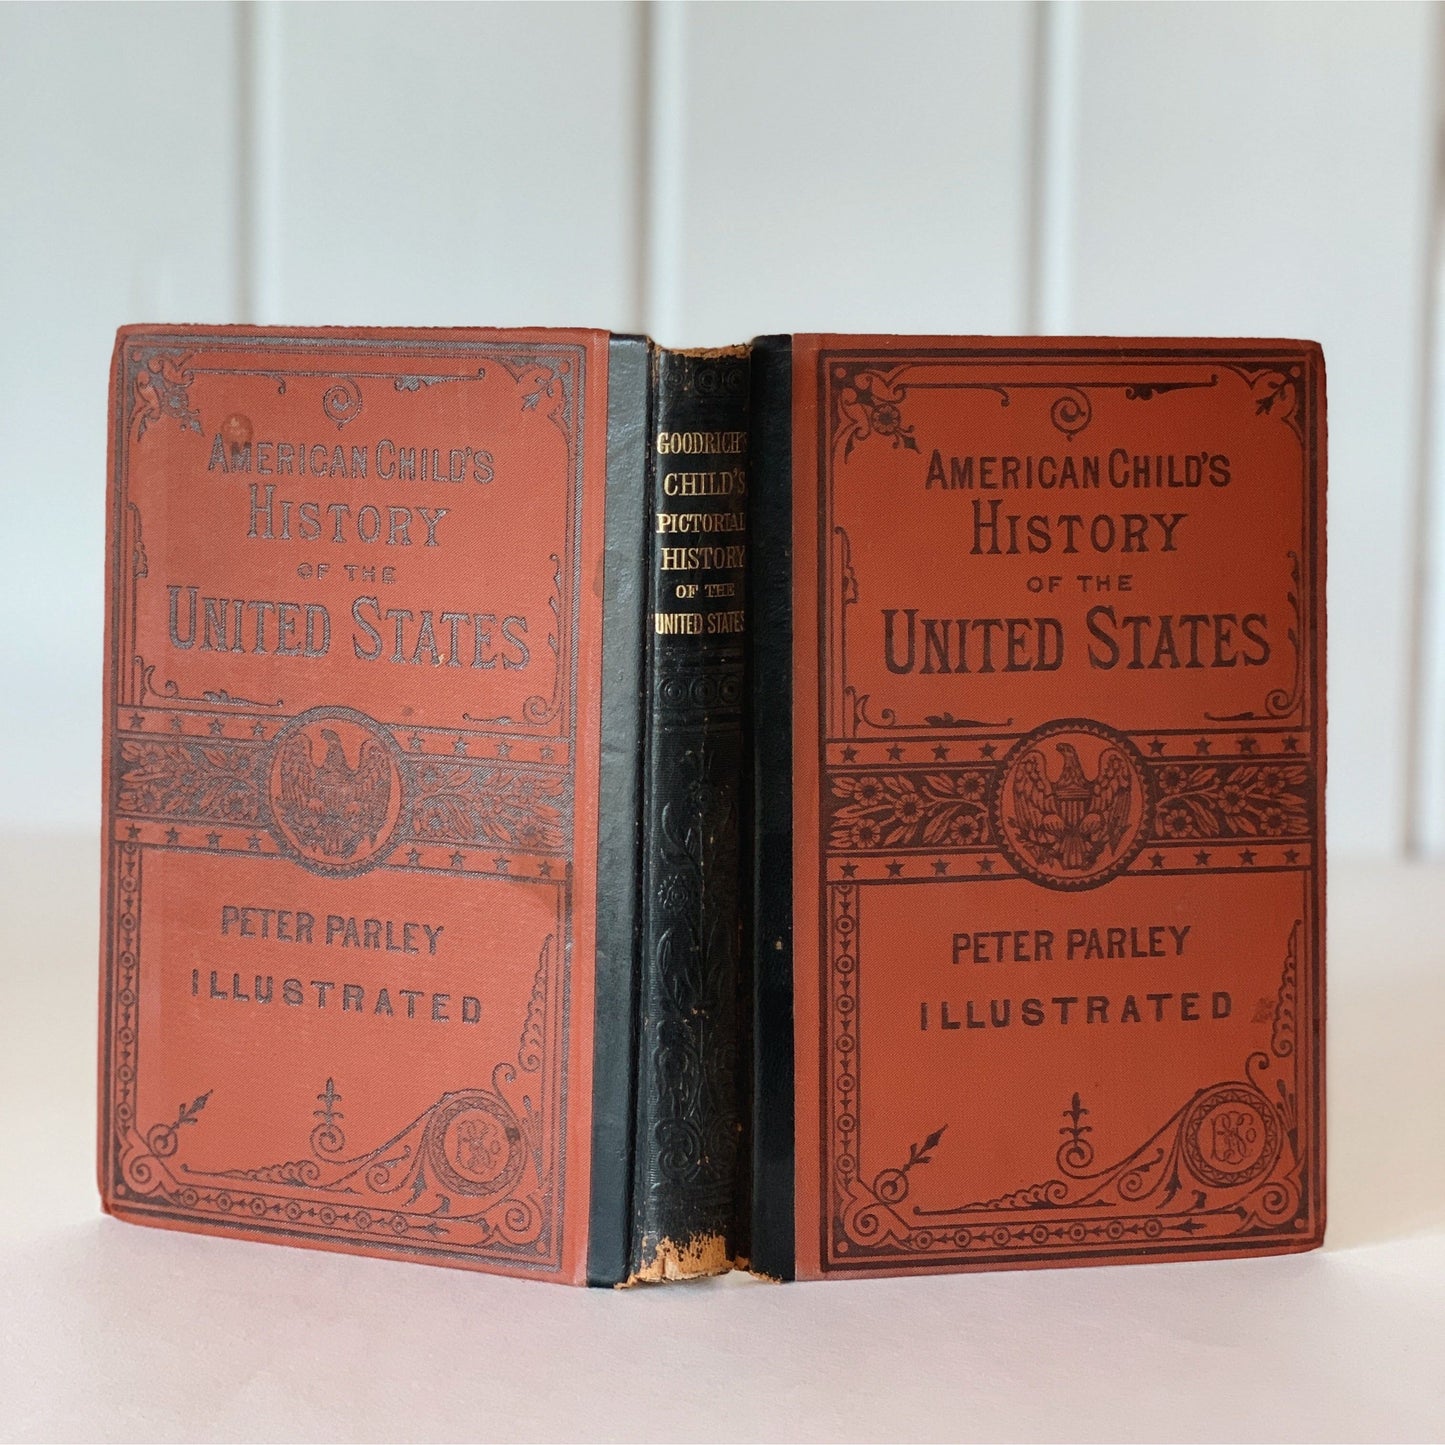 The American Child's Pictorial History of the United States, 1865 School Book